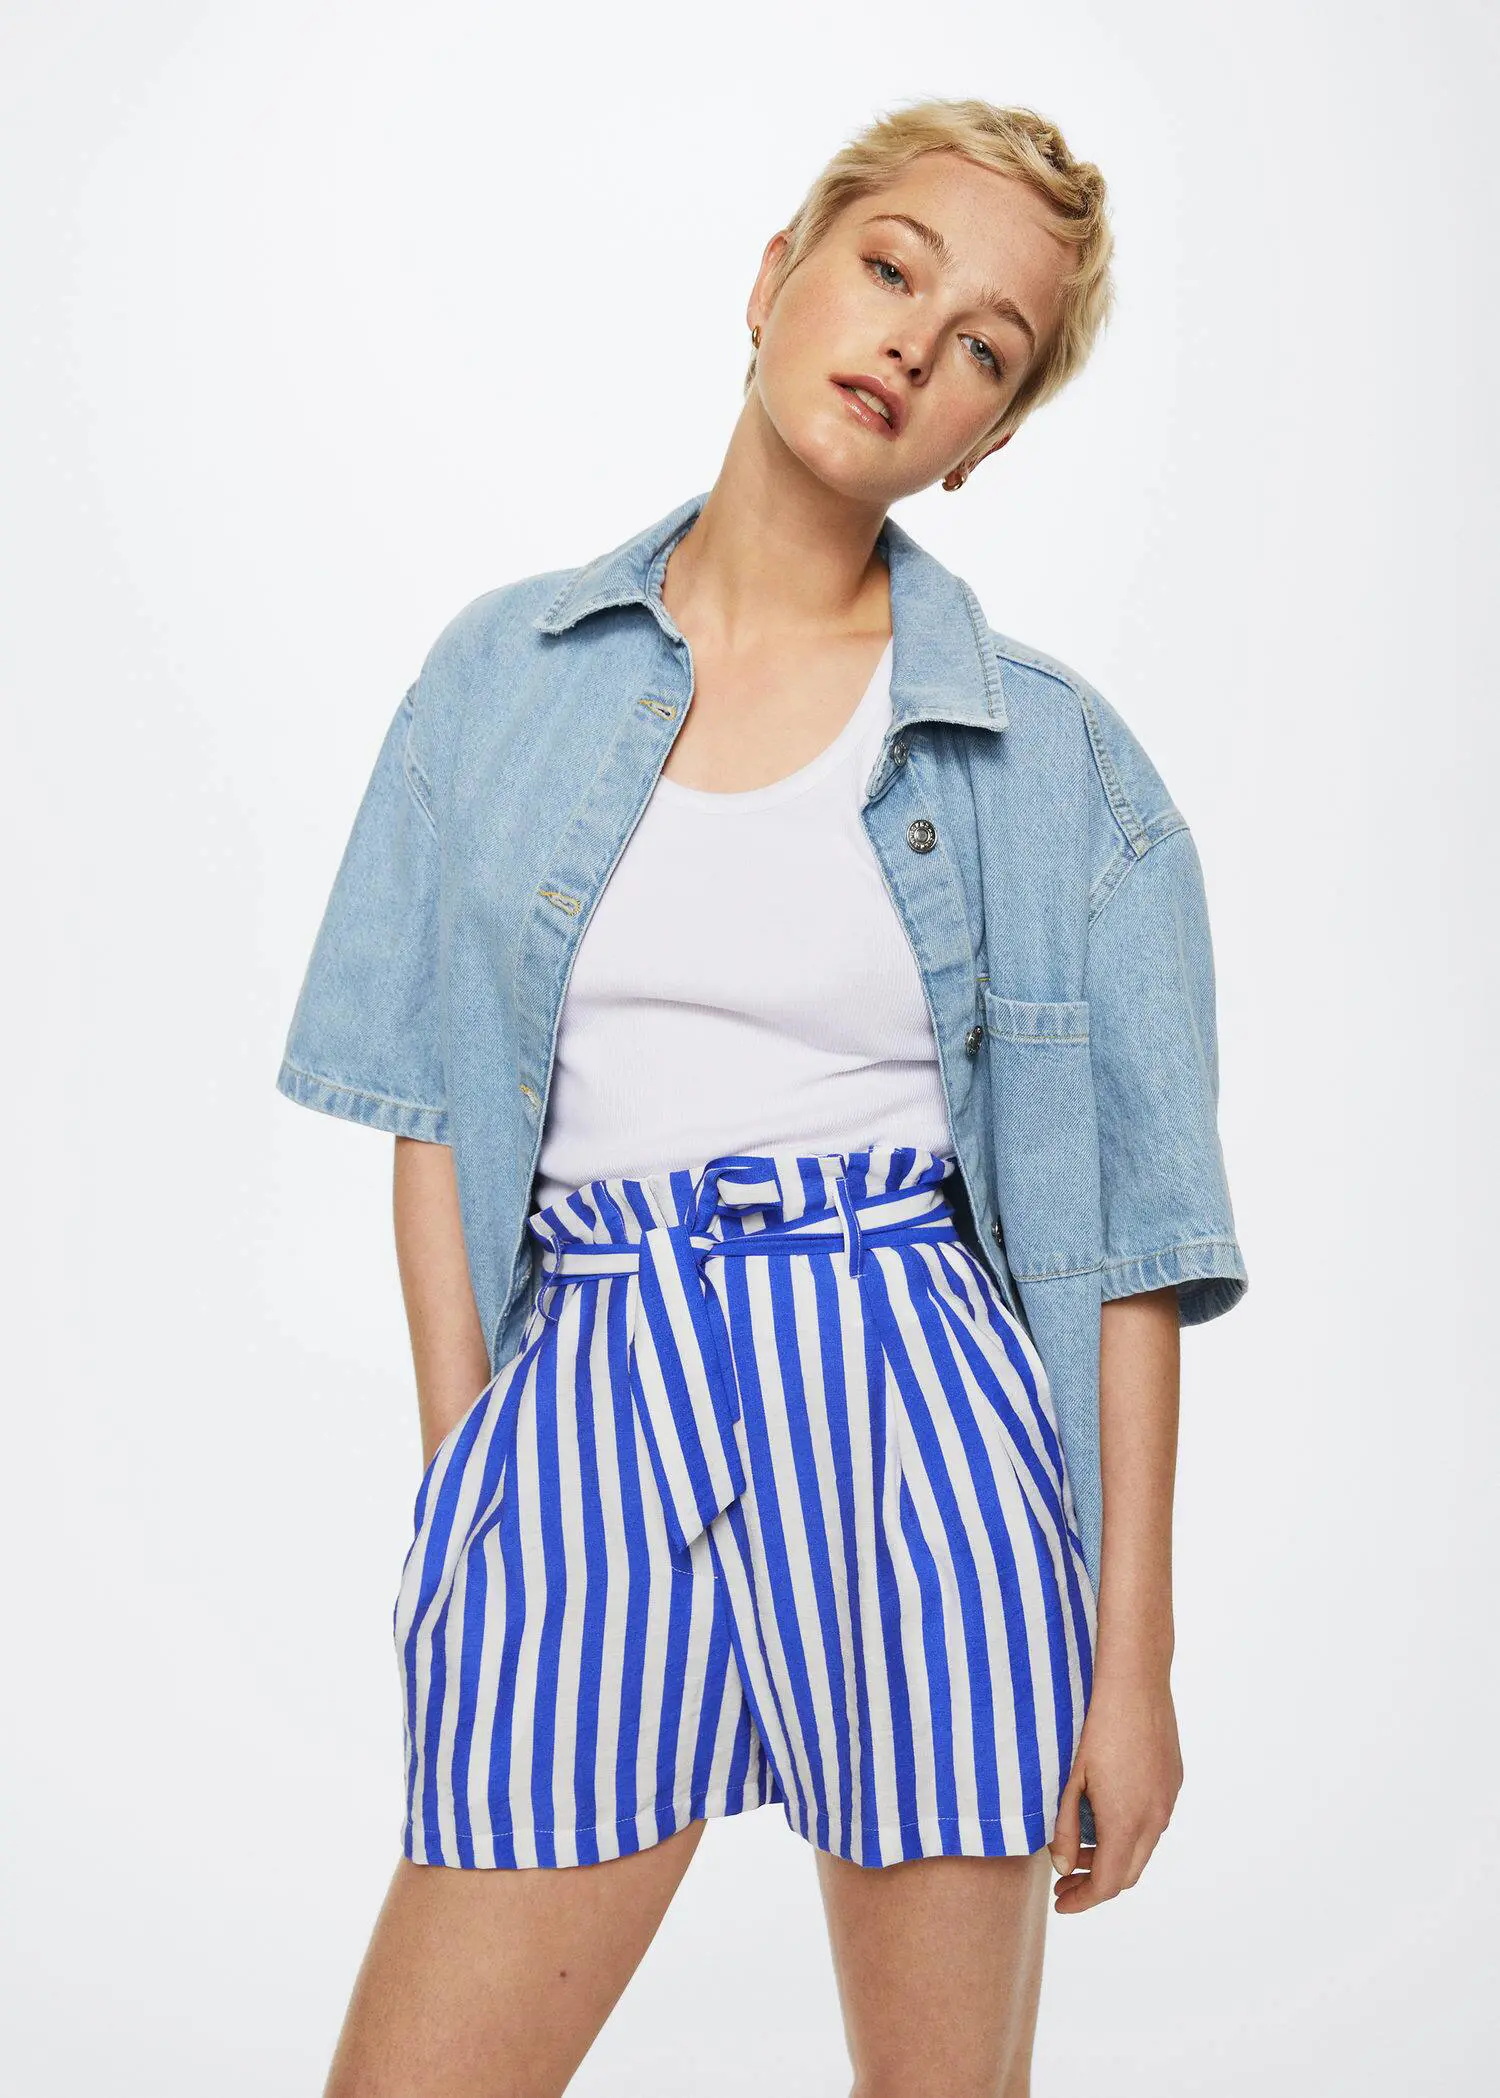 Mango Paperbag printed shorts. a woman wearing a blue and white striped outfit. 